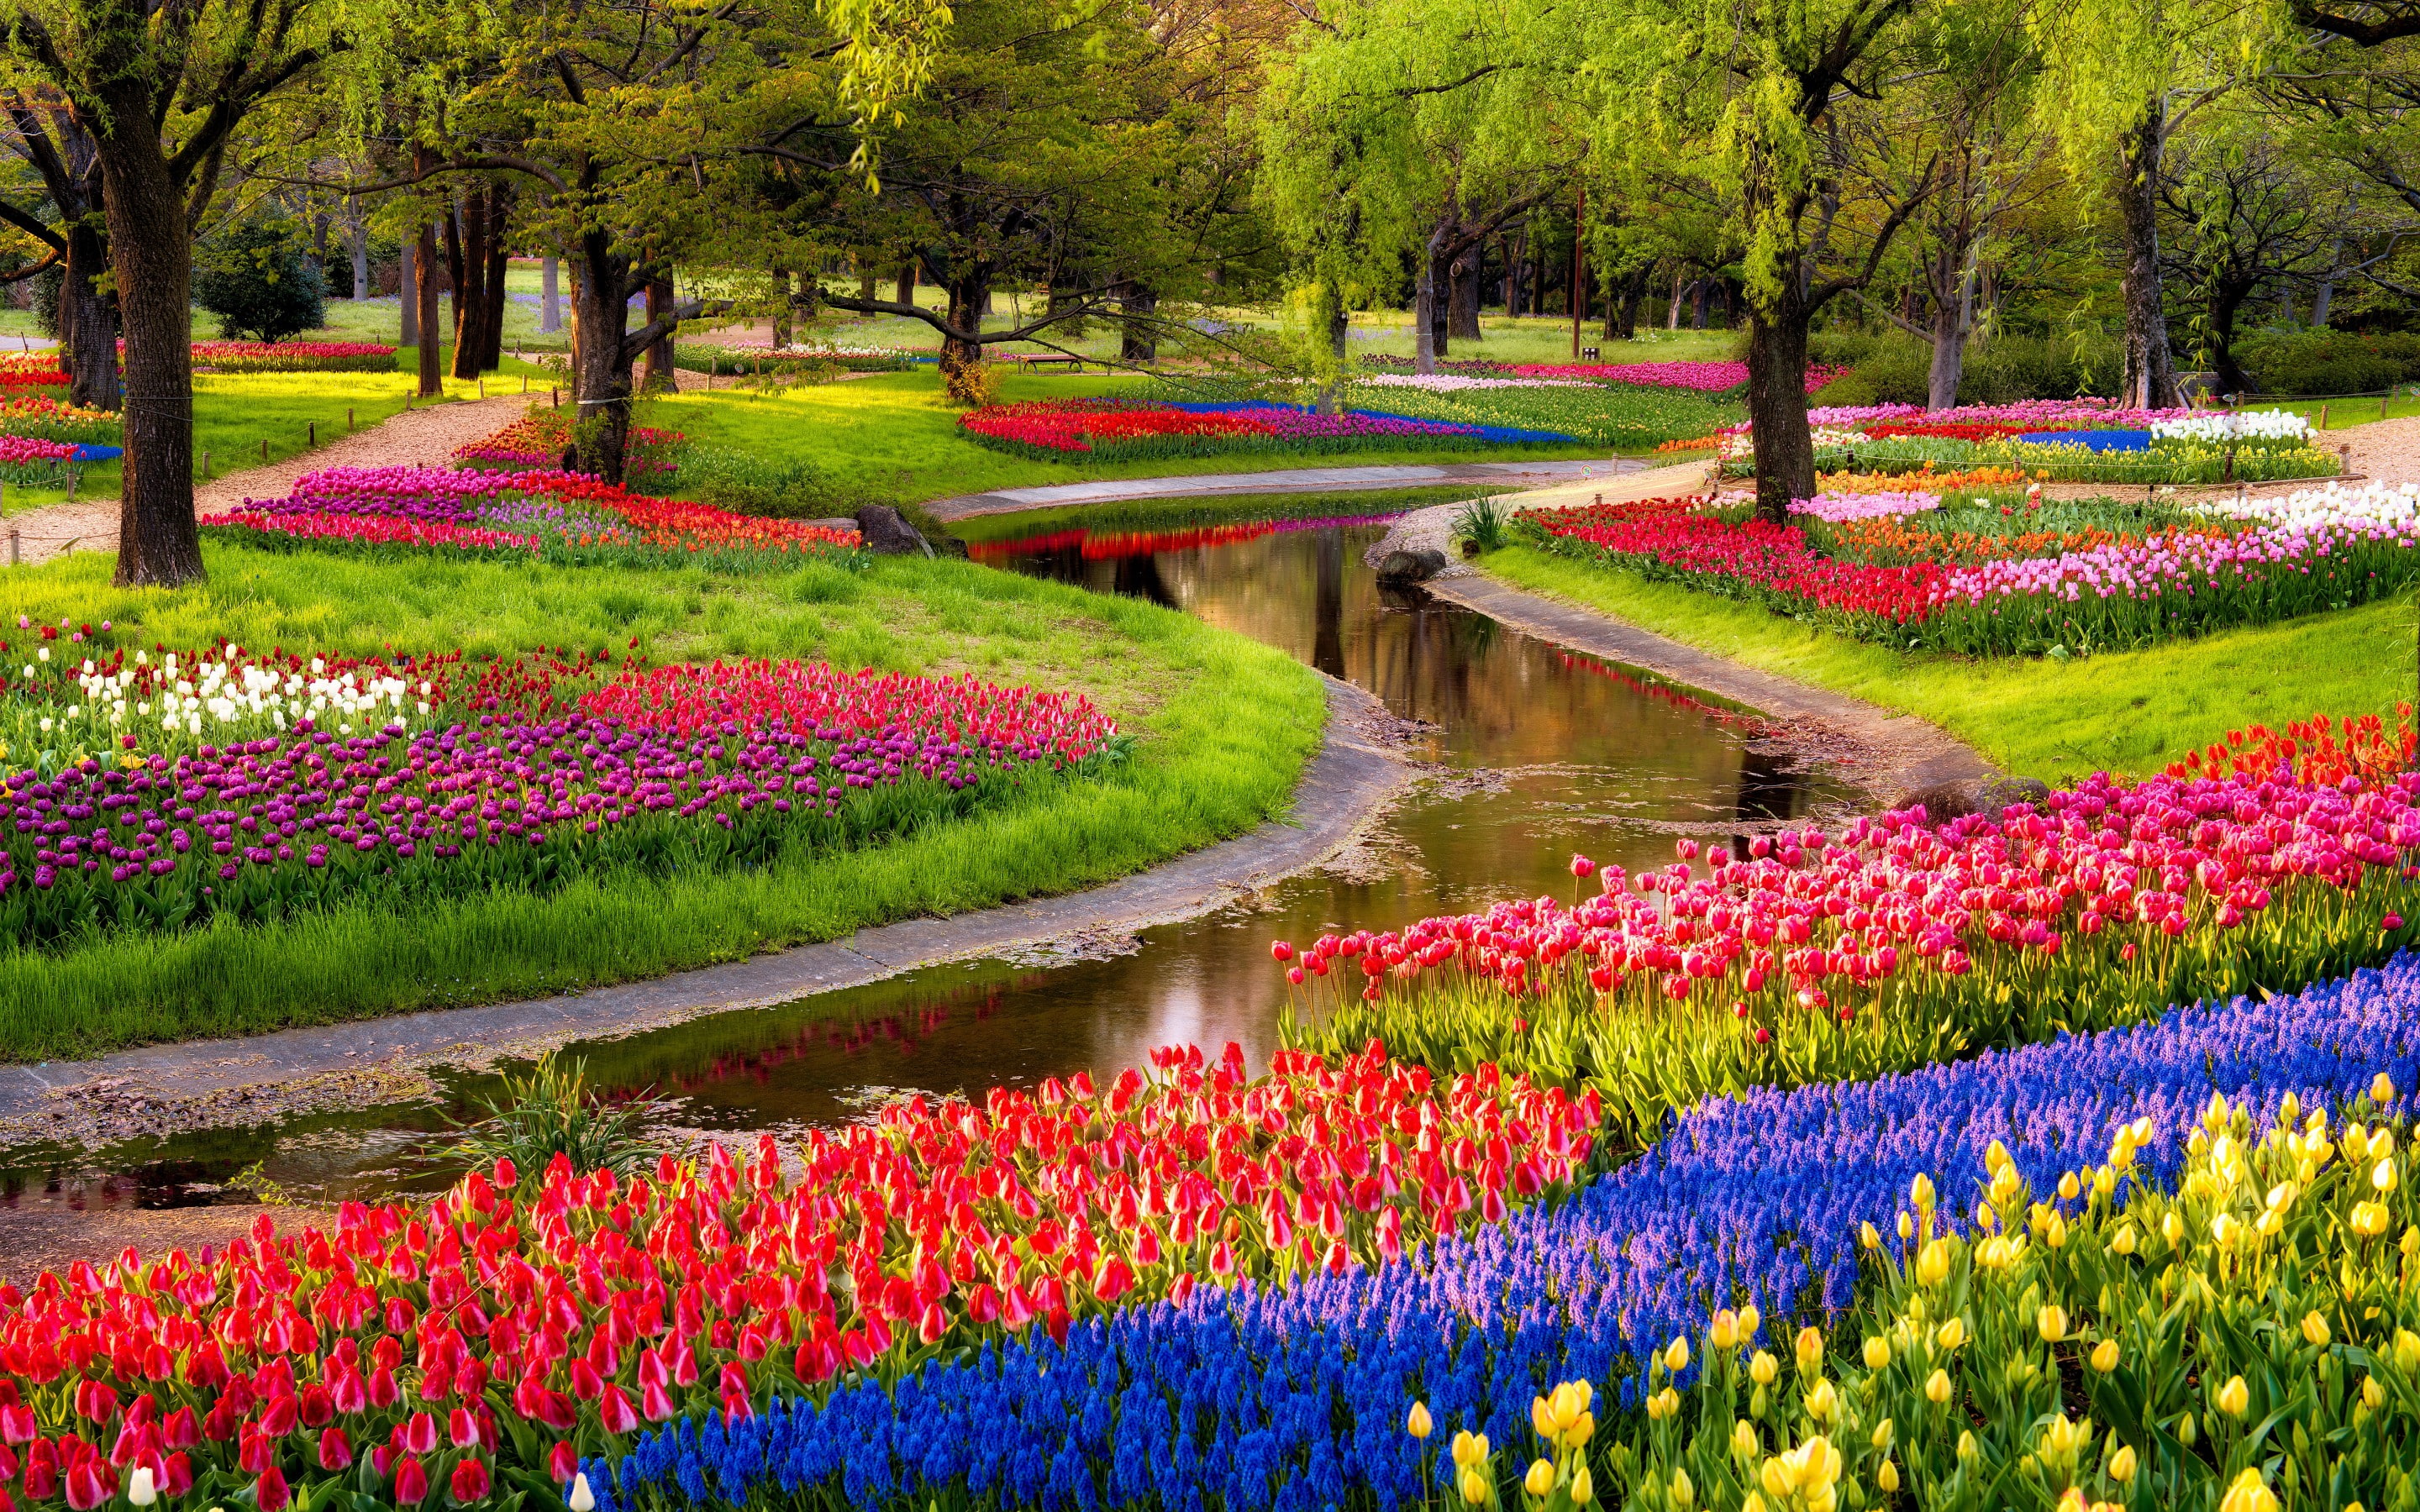 Garden, Flowers, Tulips, Field, Park, Colorful, Spring, Beautiful, Trees, River